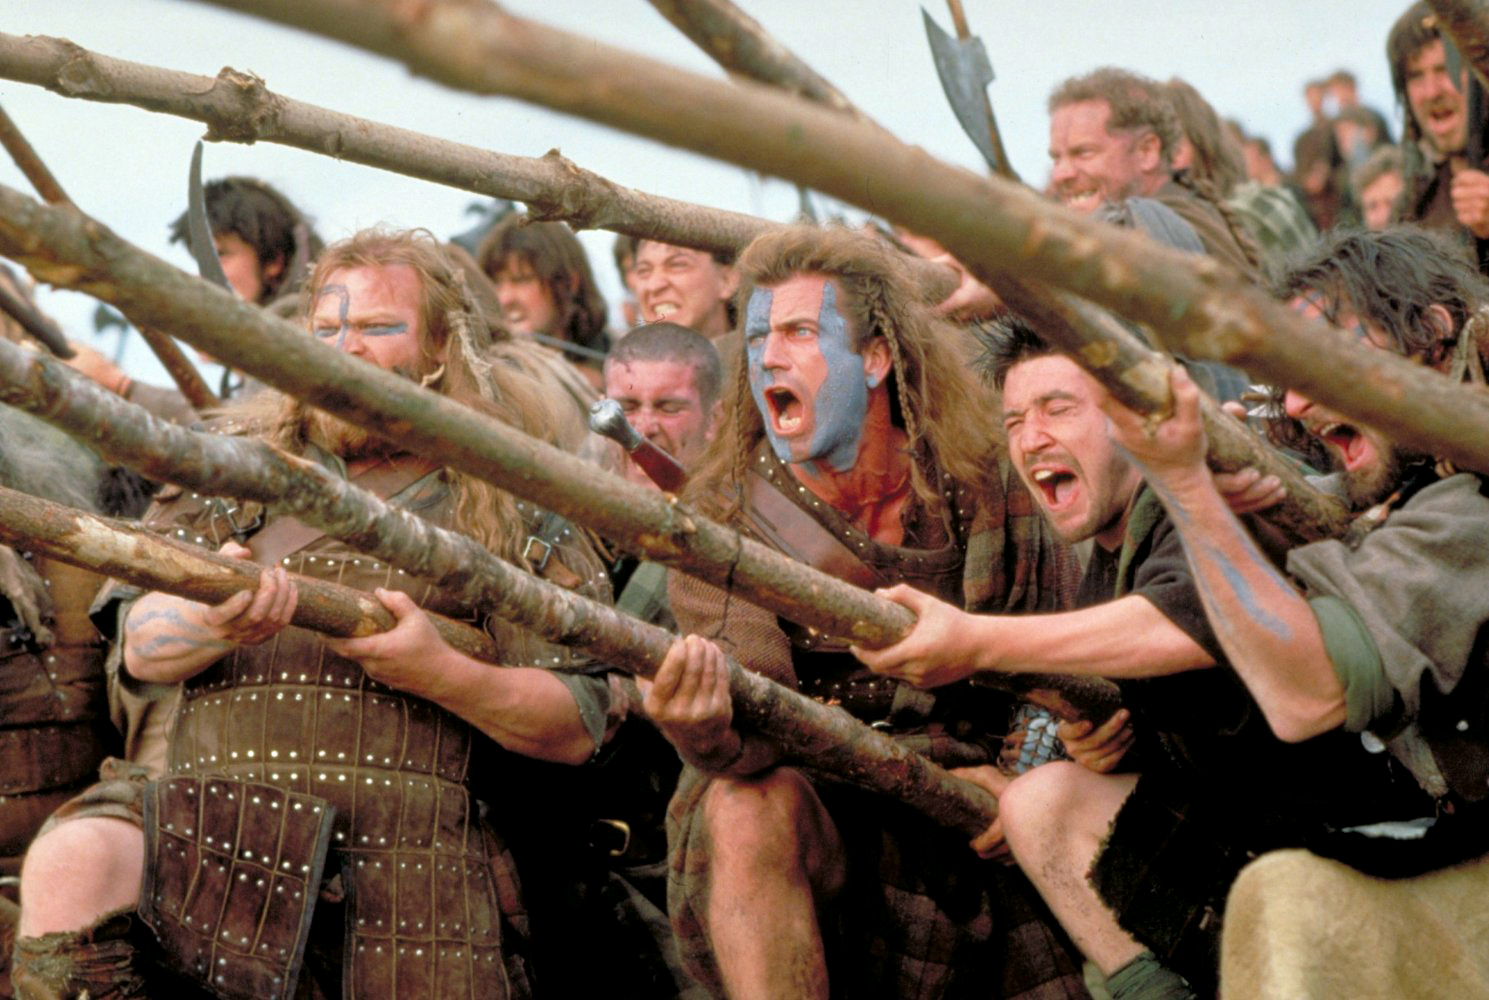 PHOTO: Mel Gibson, center, in a scene from "Braveheart."